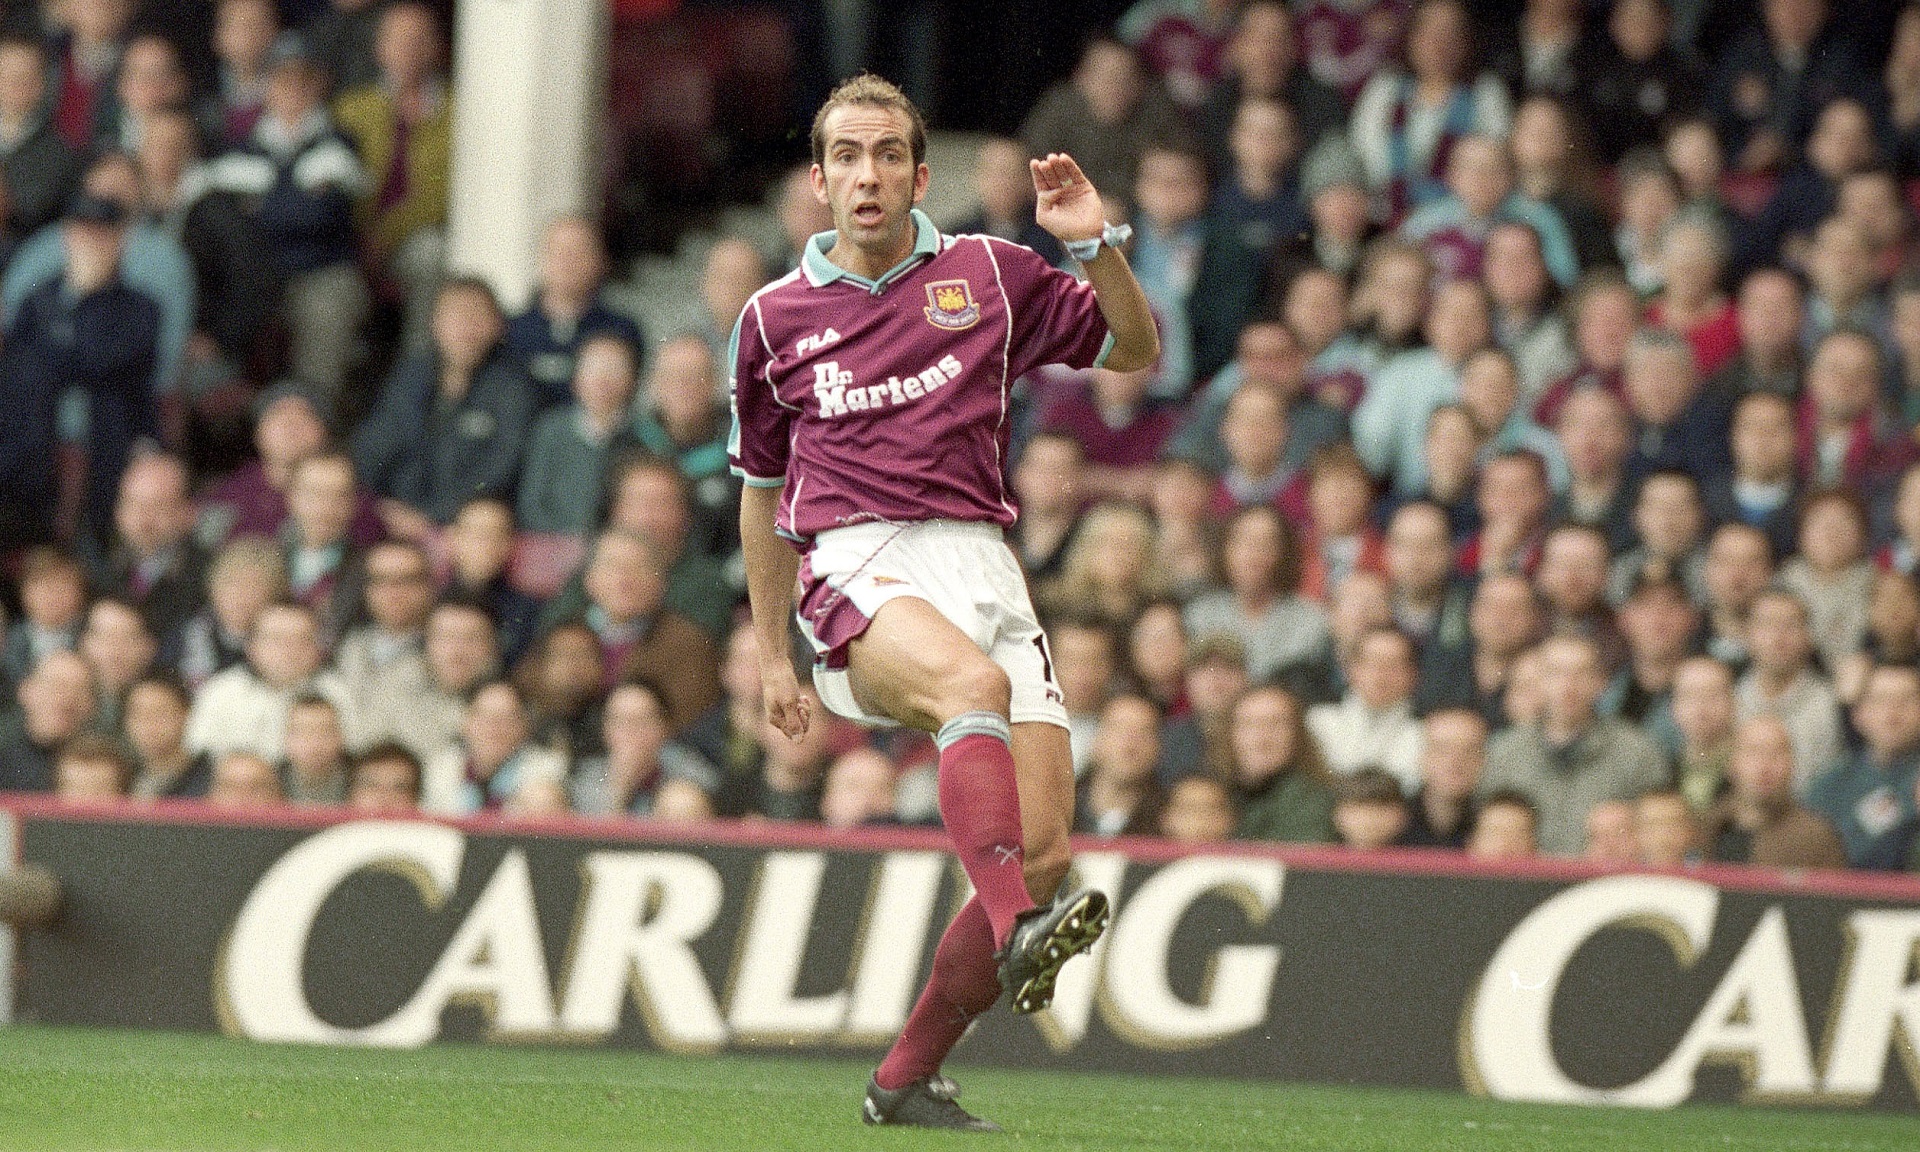 FROM THE VAULT  Paolo Di Canio Sheffield Wednesday goals 